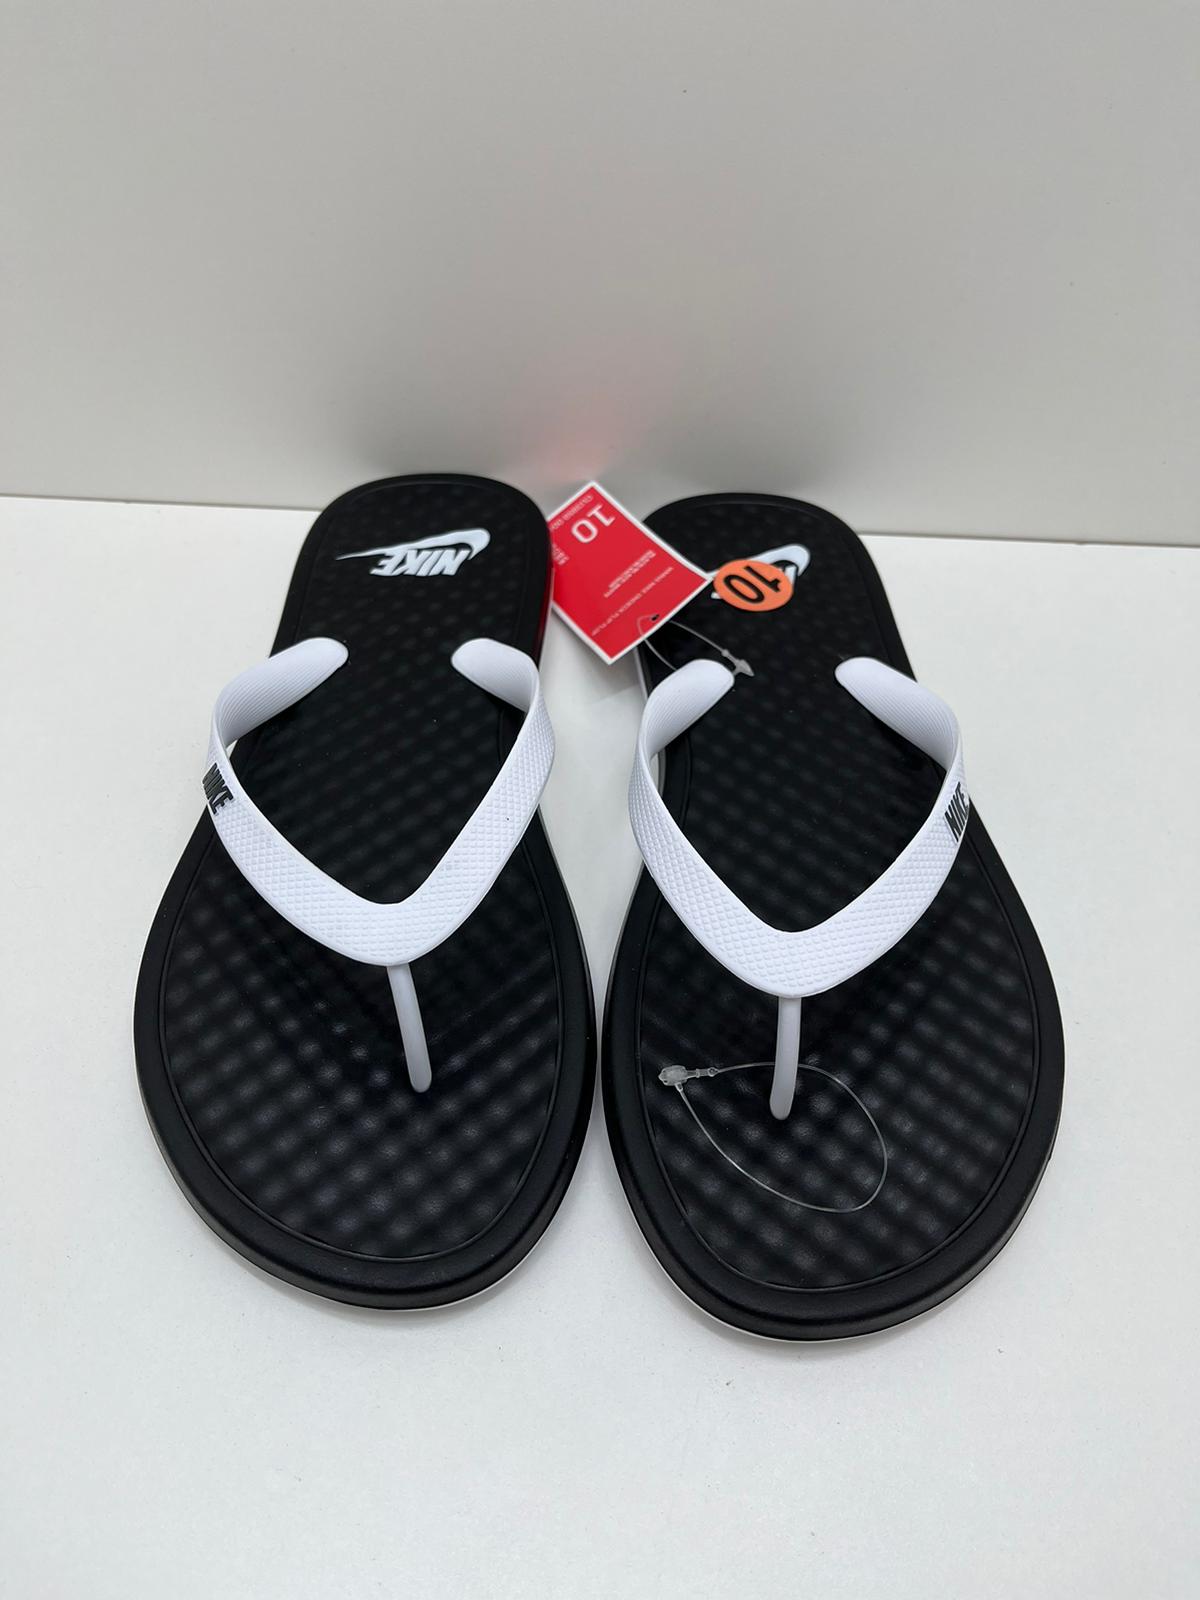 NIKE Slippers (Size 10)